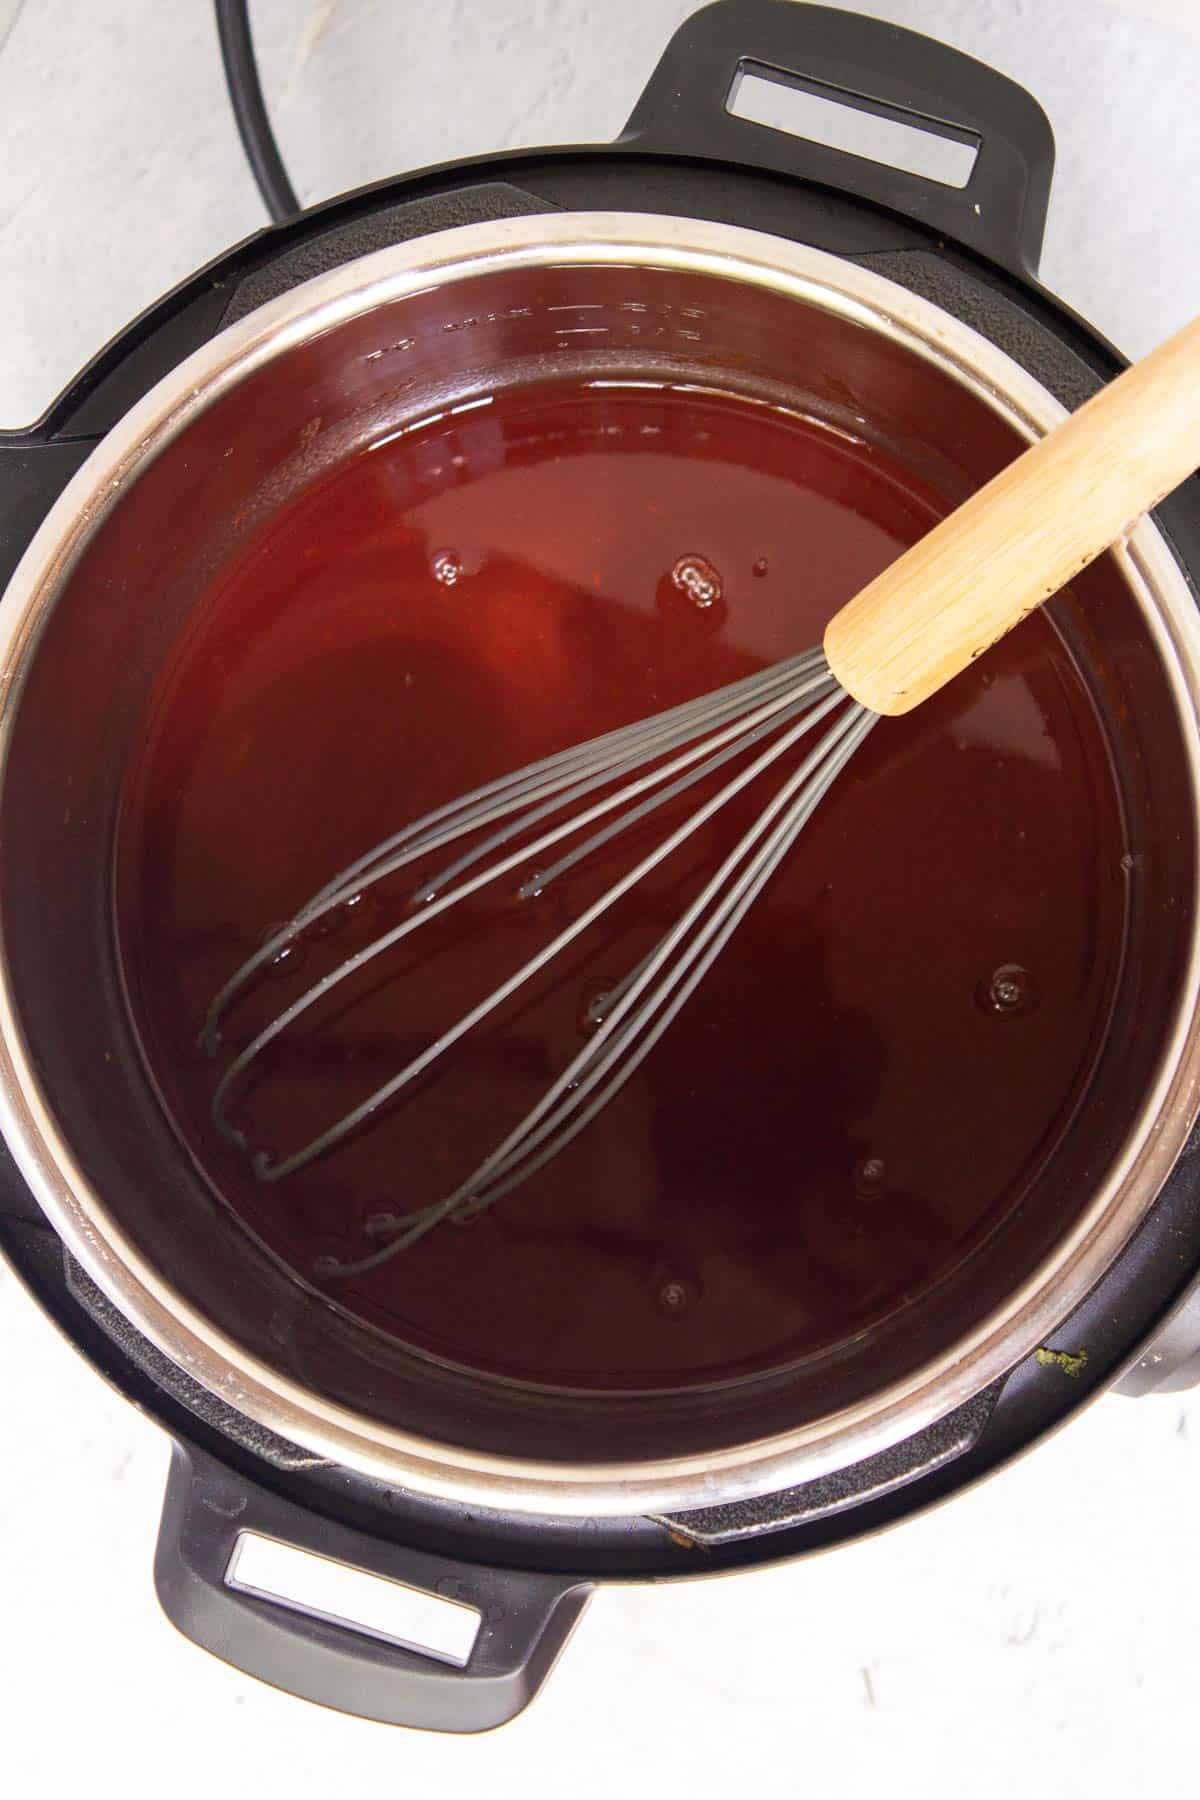 Grape jelly, Heinz chili sauce, and water are mixed together in the Instant Pot